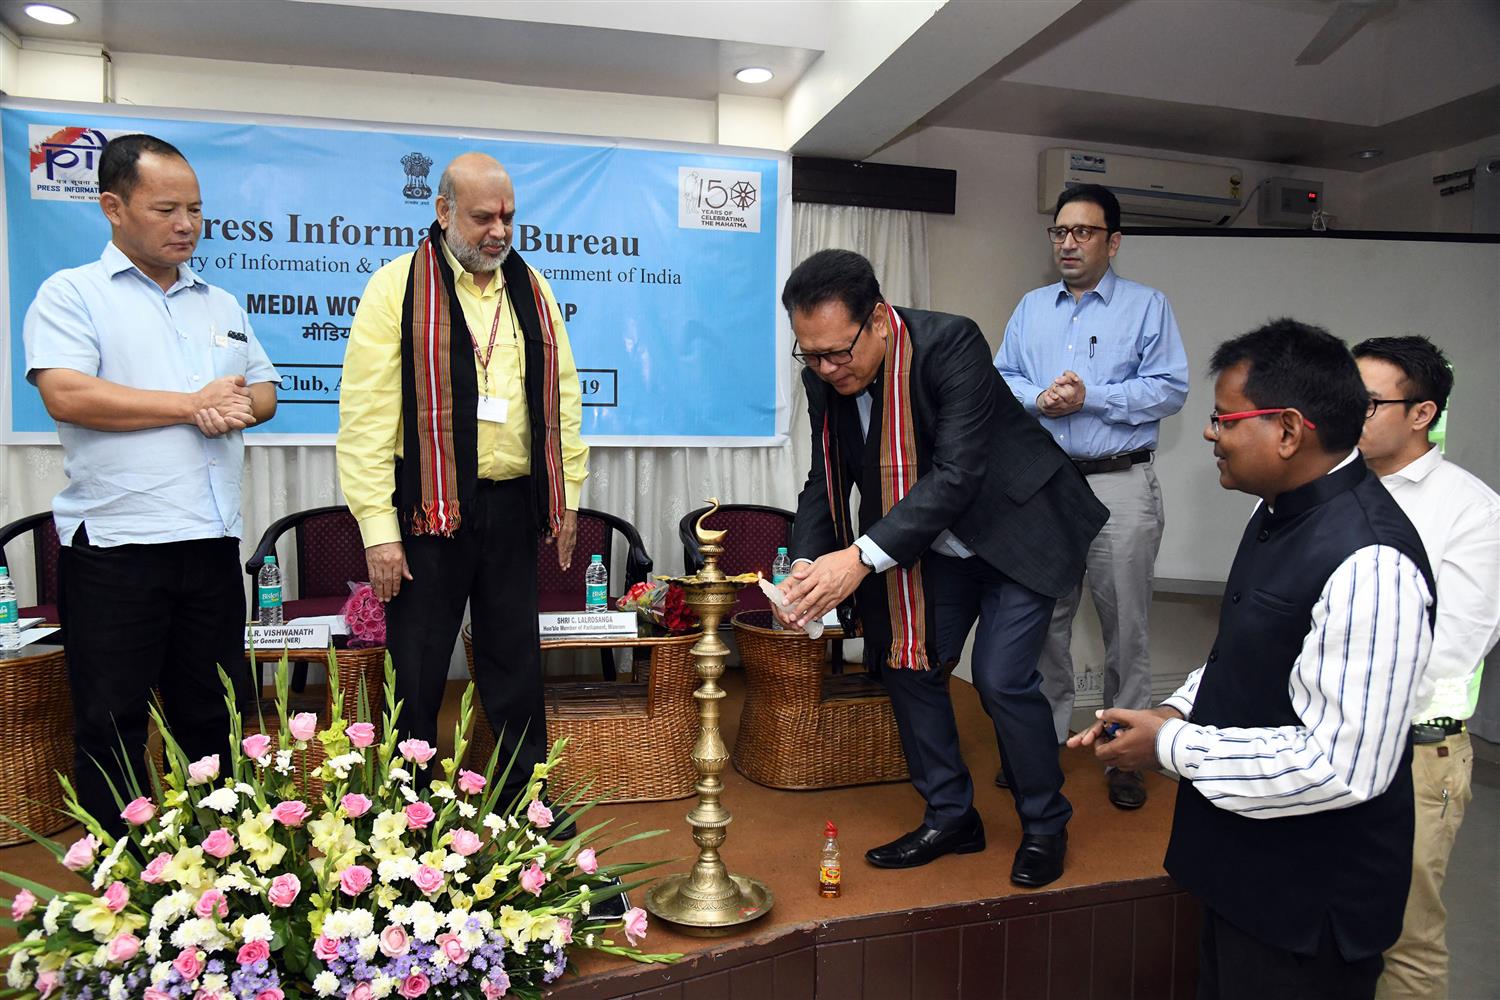 Shri C Lalrosanga, Member of Parliament, Mizoram  lighting the lamp to inaugurate Vartalap organized by Press Information Bureau, Aizawl on 20th September 2019 , Shri L R Vishwanath, Director General, Ministry of Information &  Broadcasting and Shri Zonunsanga Khiangte, President of Mozoram Journalist’s Association and Shri Ashish Kundra, CEO, Election office of Mizoram are also seen in the picture.